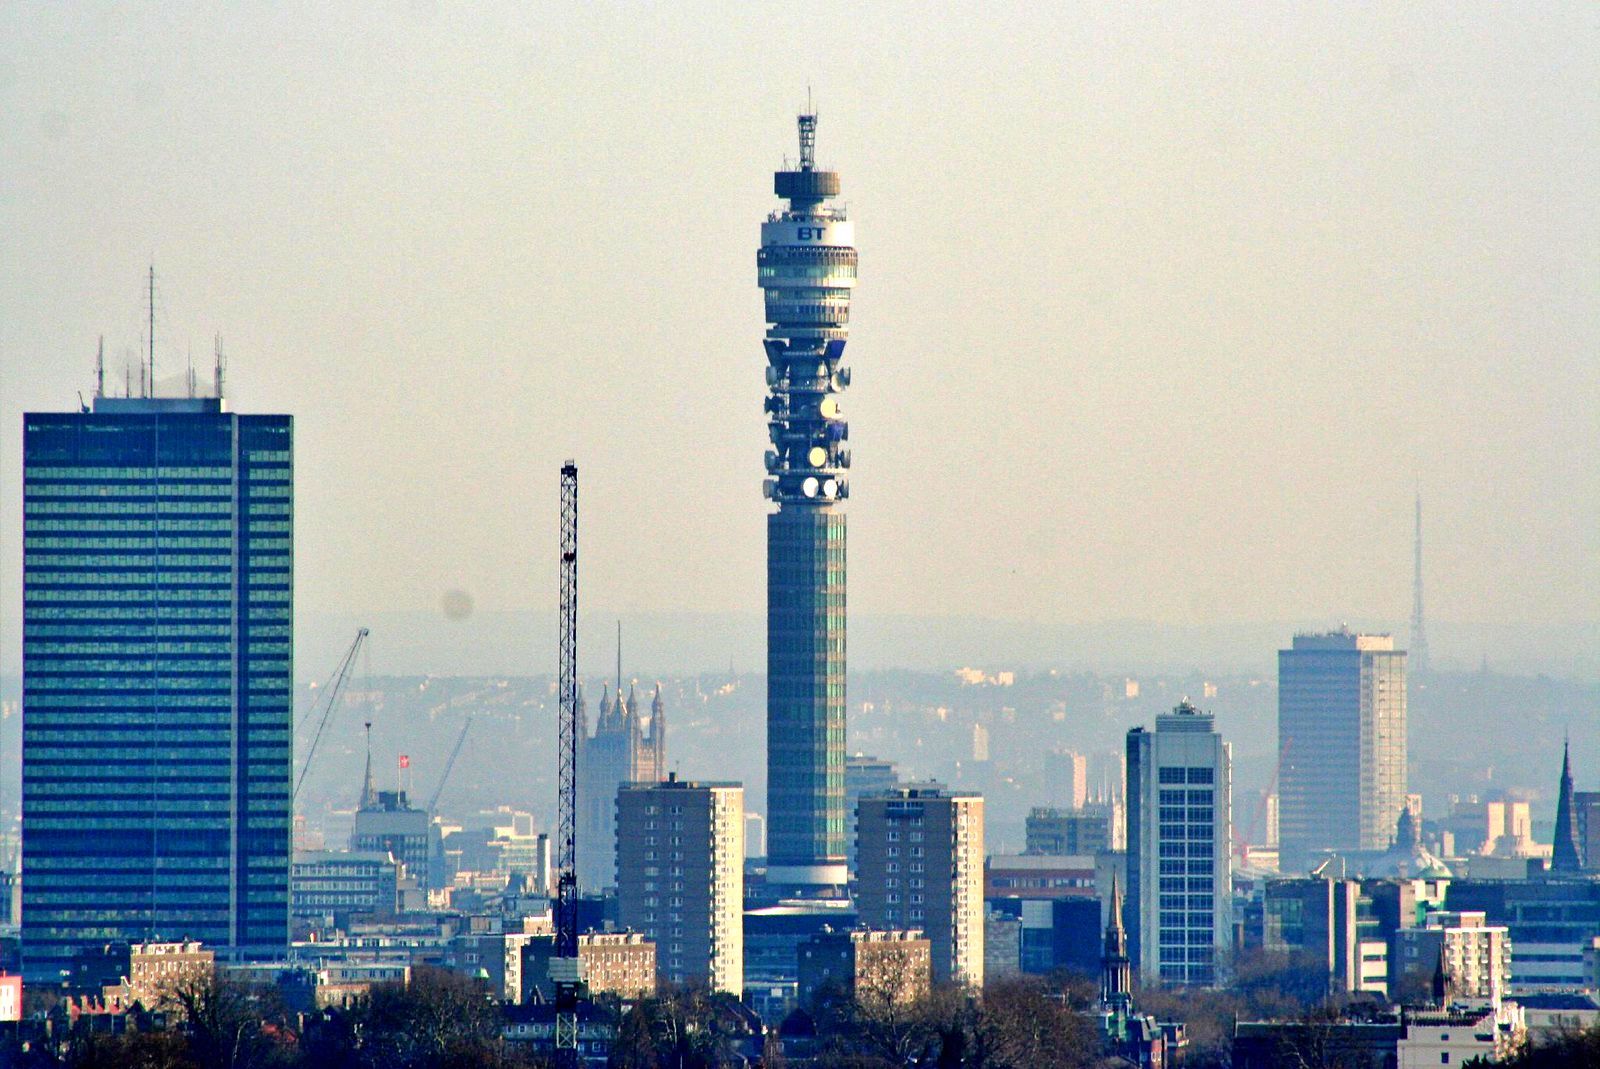 London's BT Tower to be reimagined as a hotel